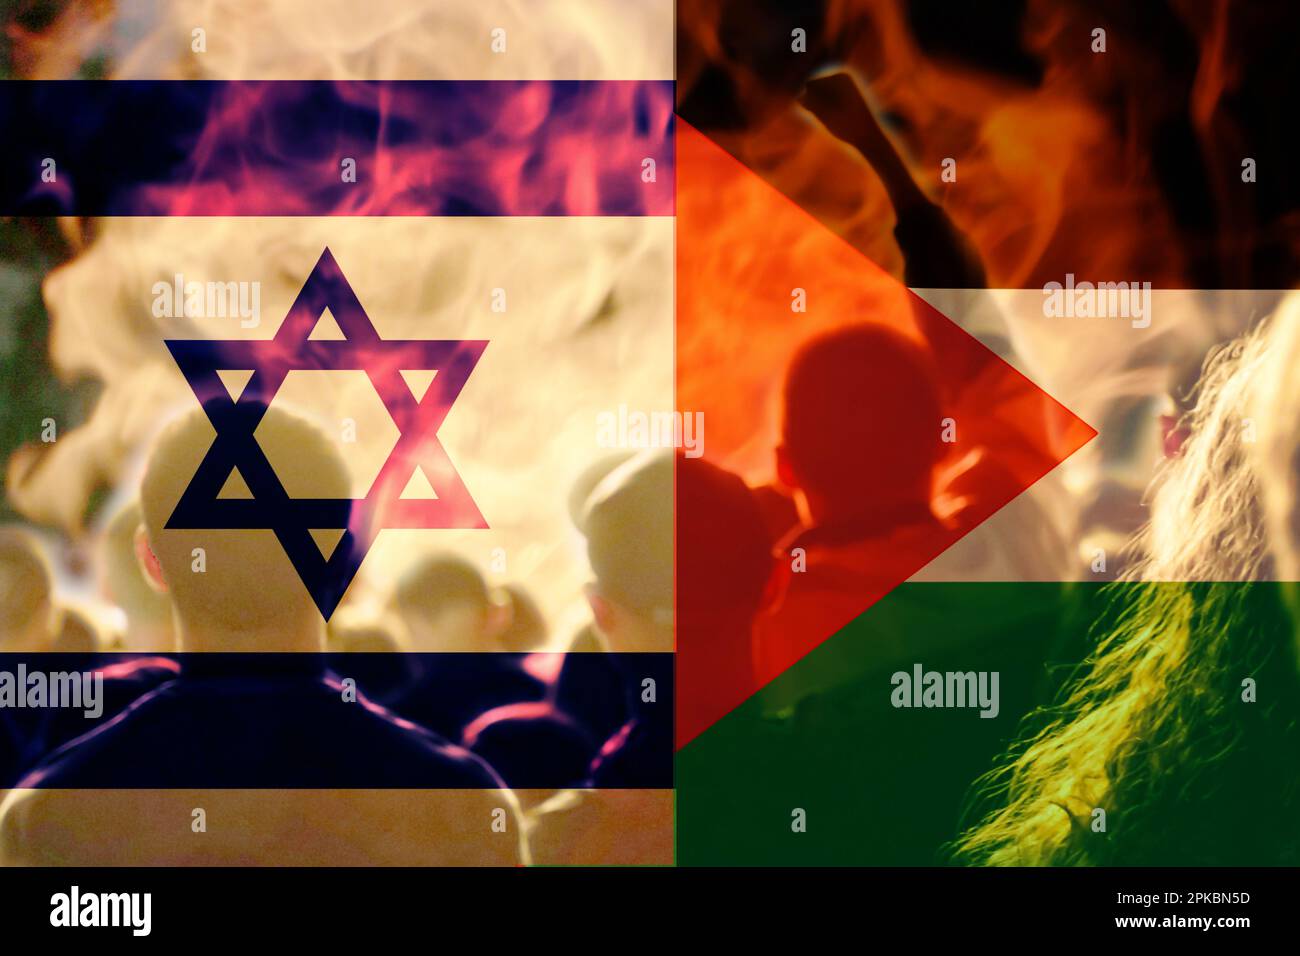 Israel Palestine war. Concept of crisis of war and political conflicts between nations. Flags. Fire, flames. Cracked stone background. Protests demons Stock Photo